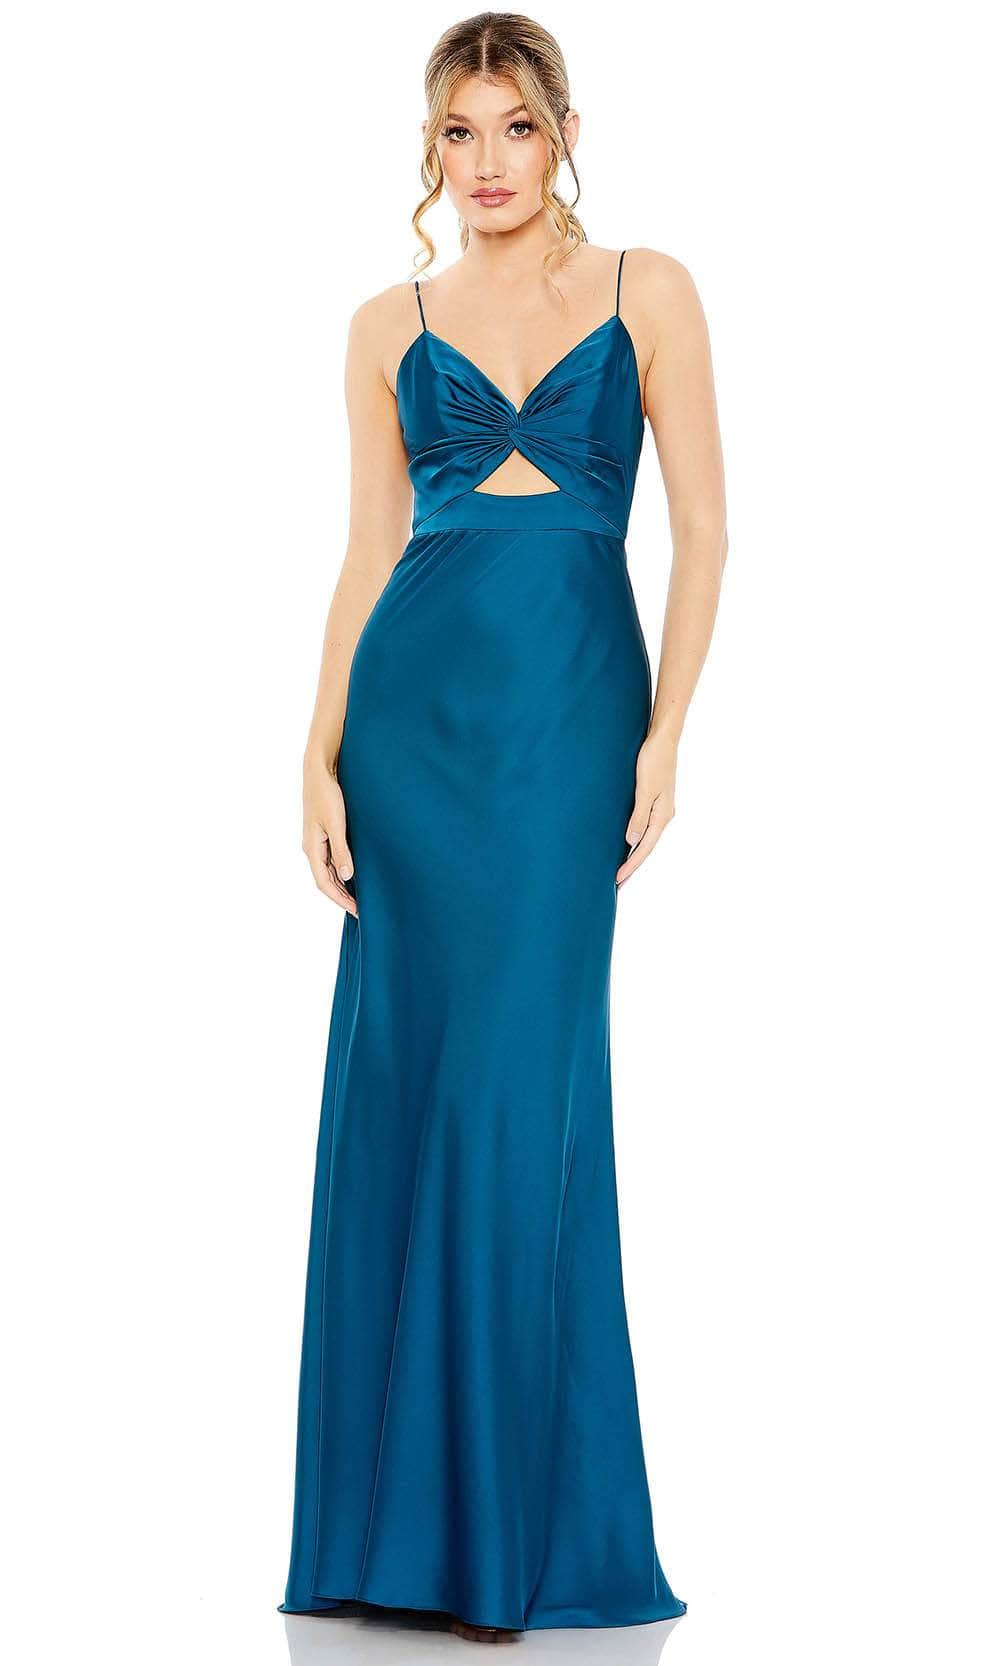 Ieena Duggal 68347 - V-Neck Knotted Front Evening Gown
